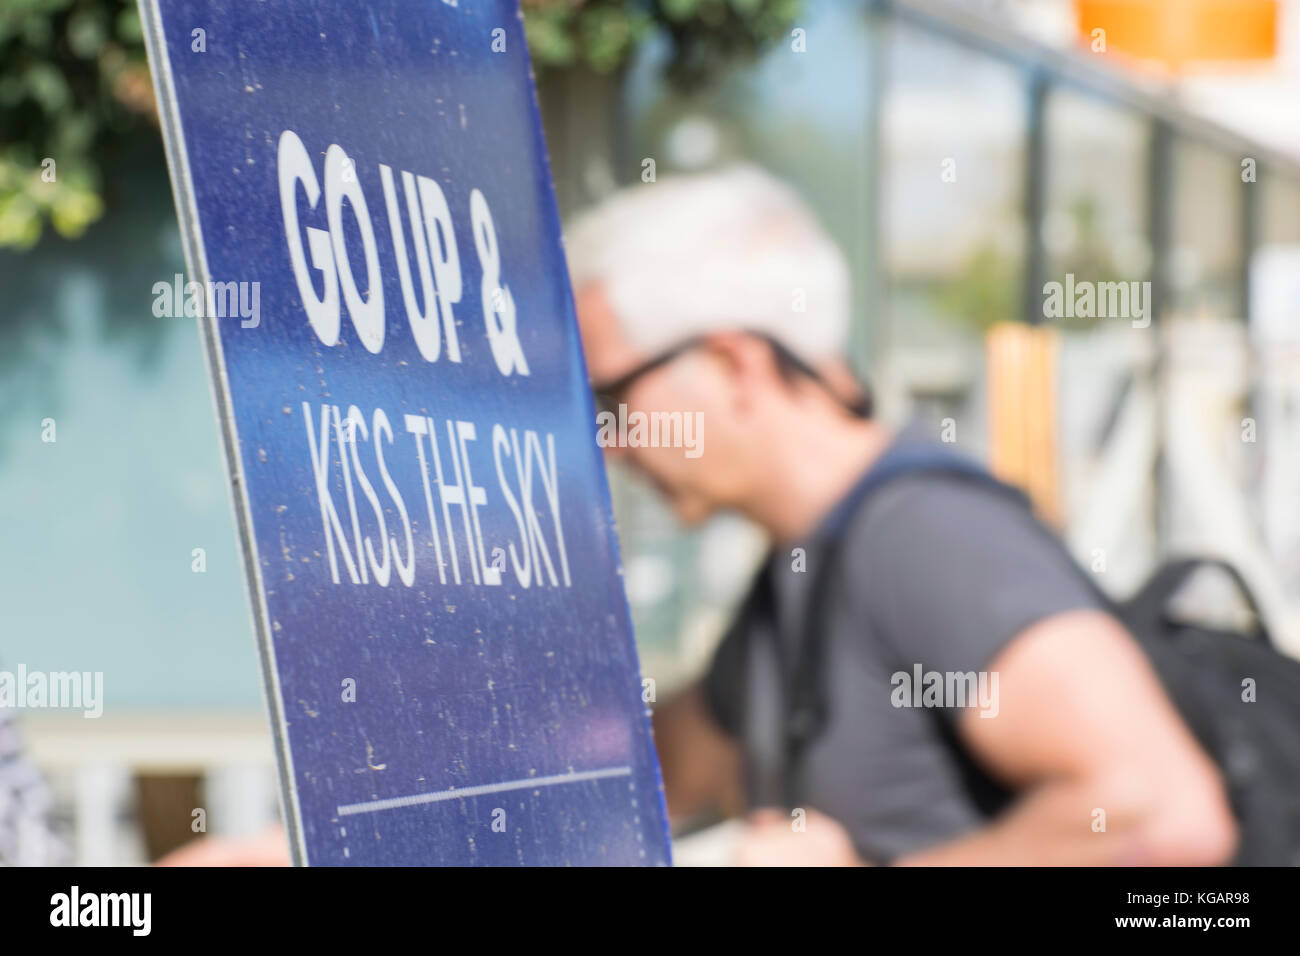 Billboard Go up and Kiss the sky, holidaymaker in background Stock Photo